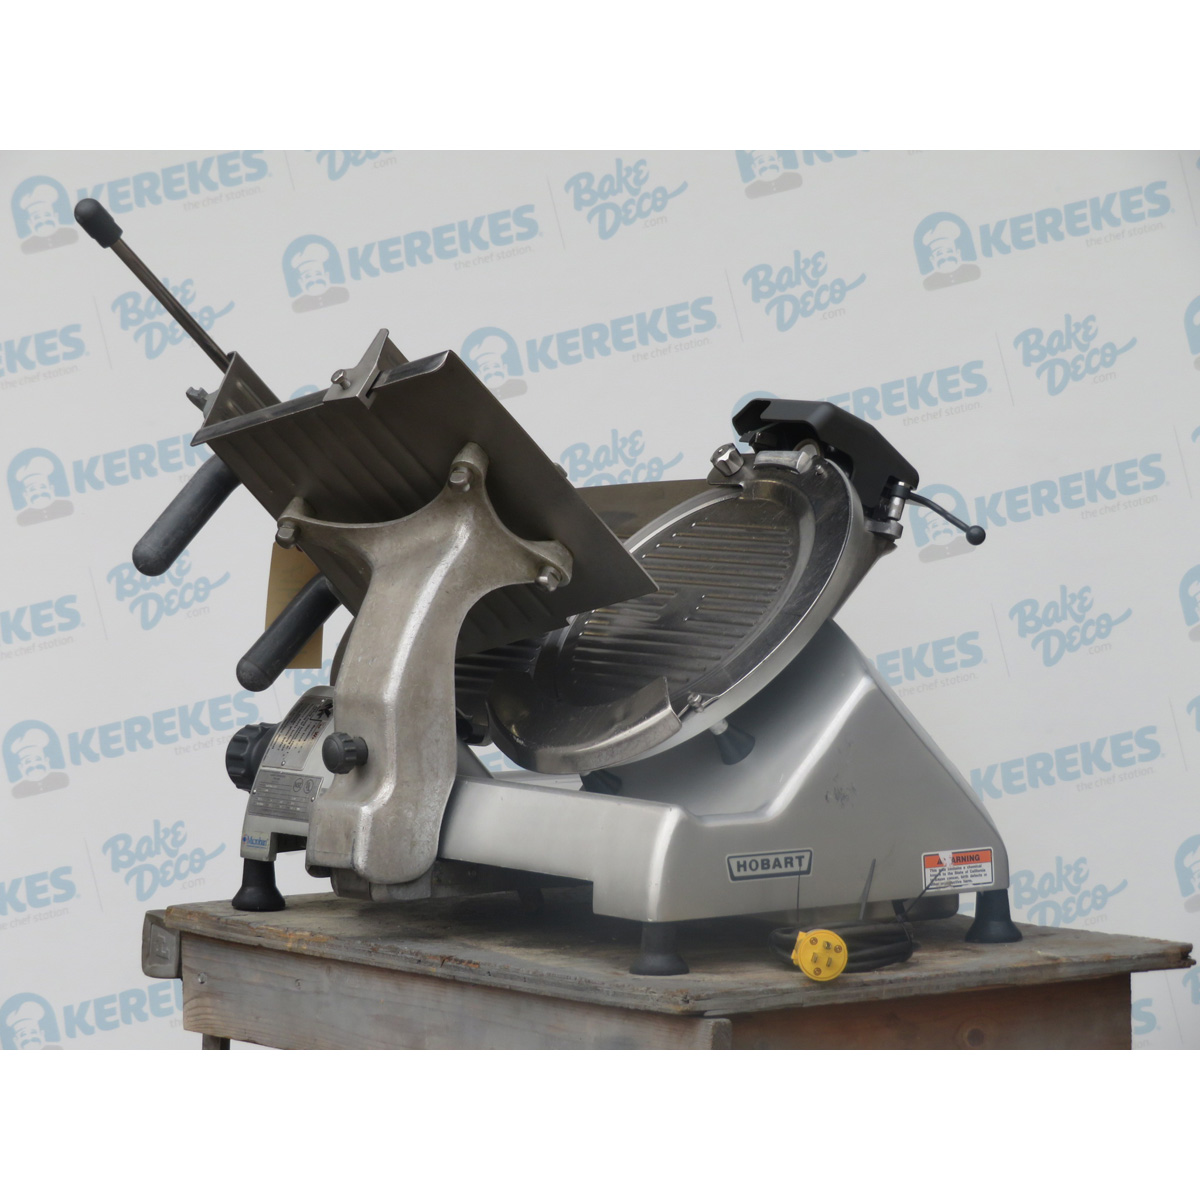 Hobart 2812 Manual Meat Slicer 1/2 HP, Used Great Condition image 2